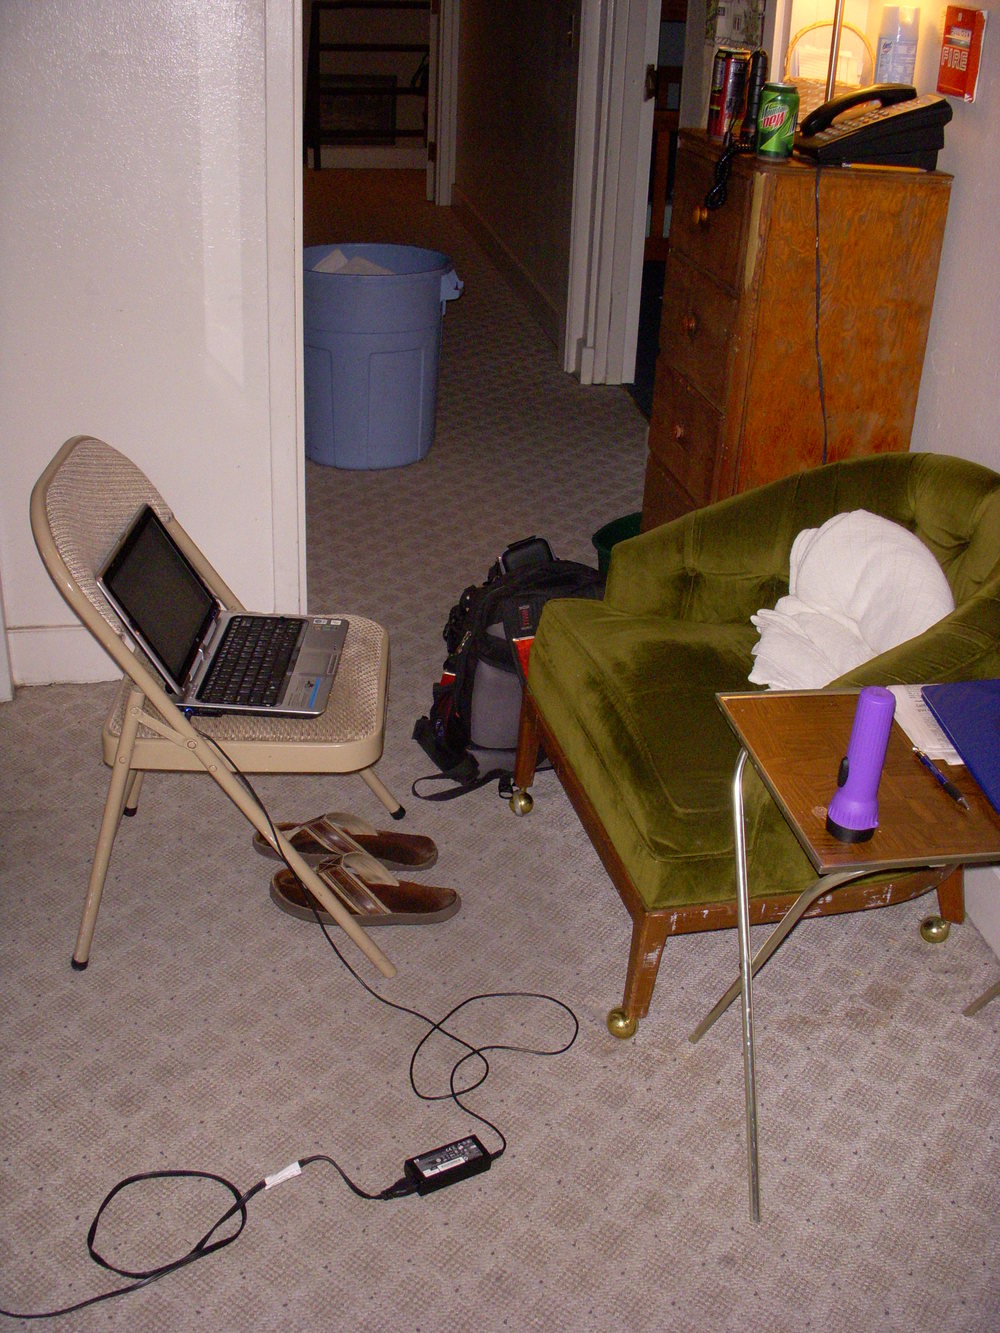  A photo of the overnight chair at the CRC. This is where I spend my hours at all night long. 